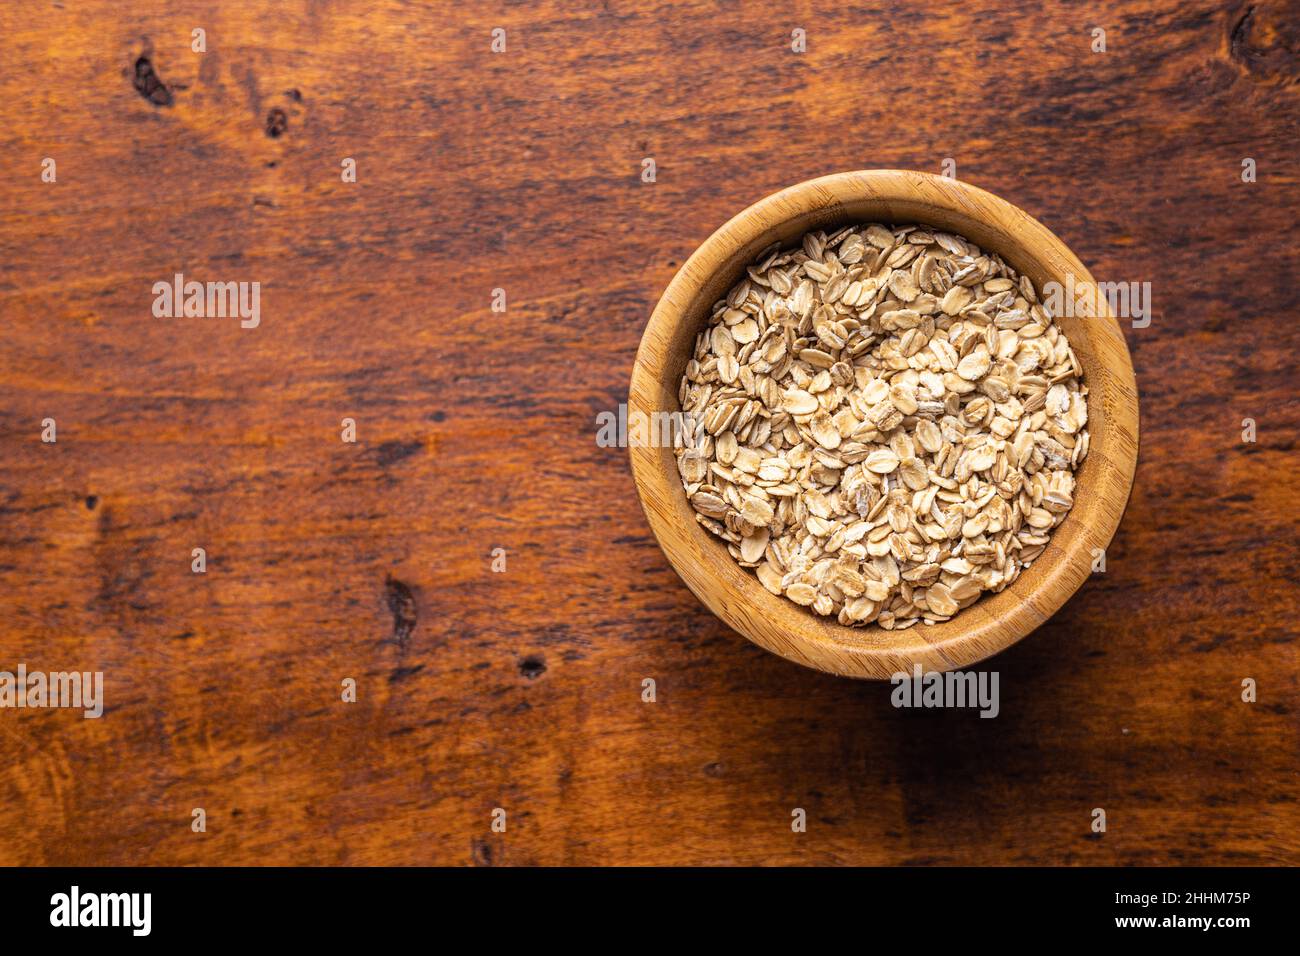 Breakfast cereals. Uncooked oatmeal. Raw oat flakes in bowl on wooden table. Top view. Stock Photo